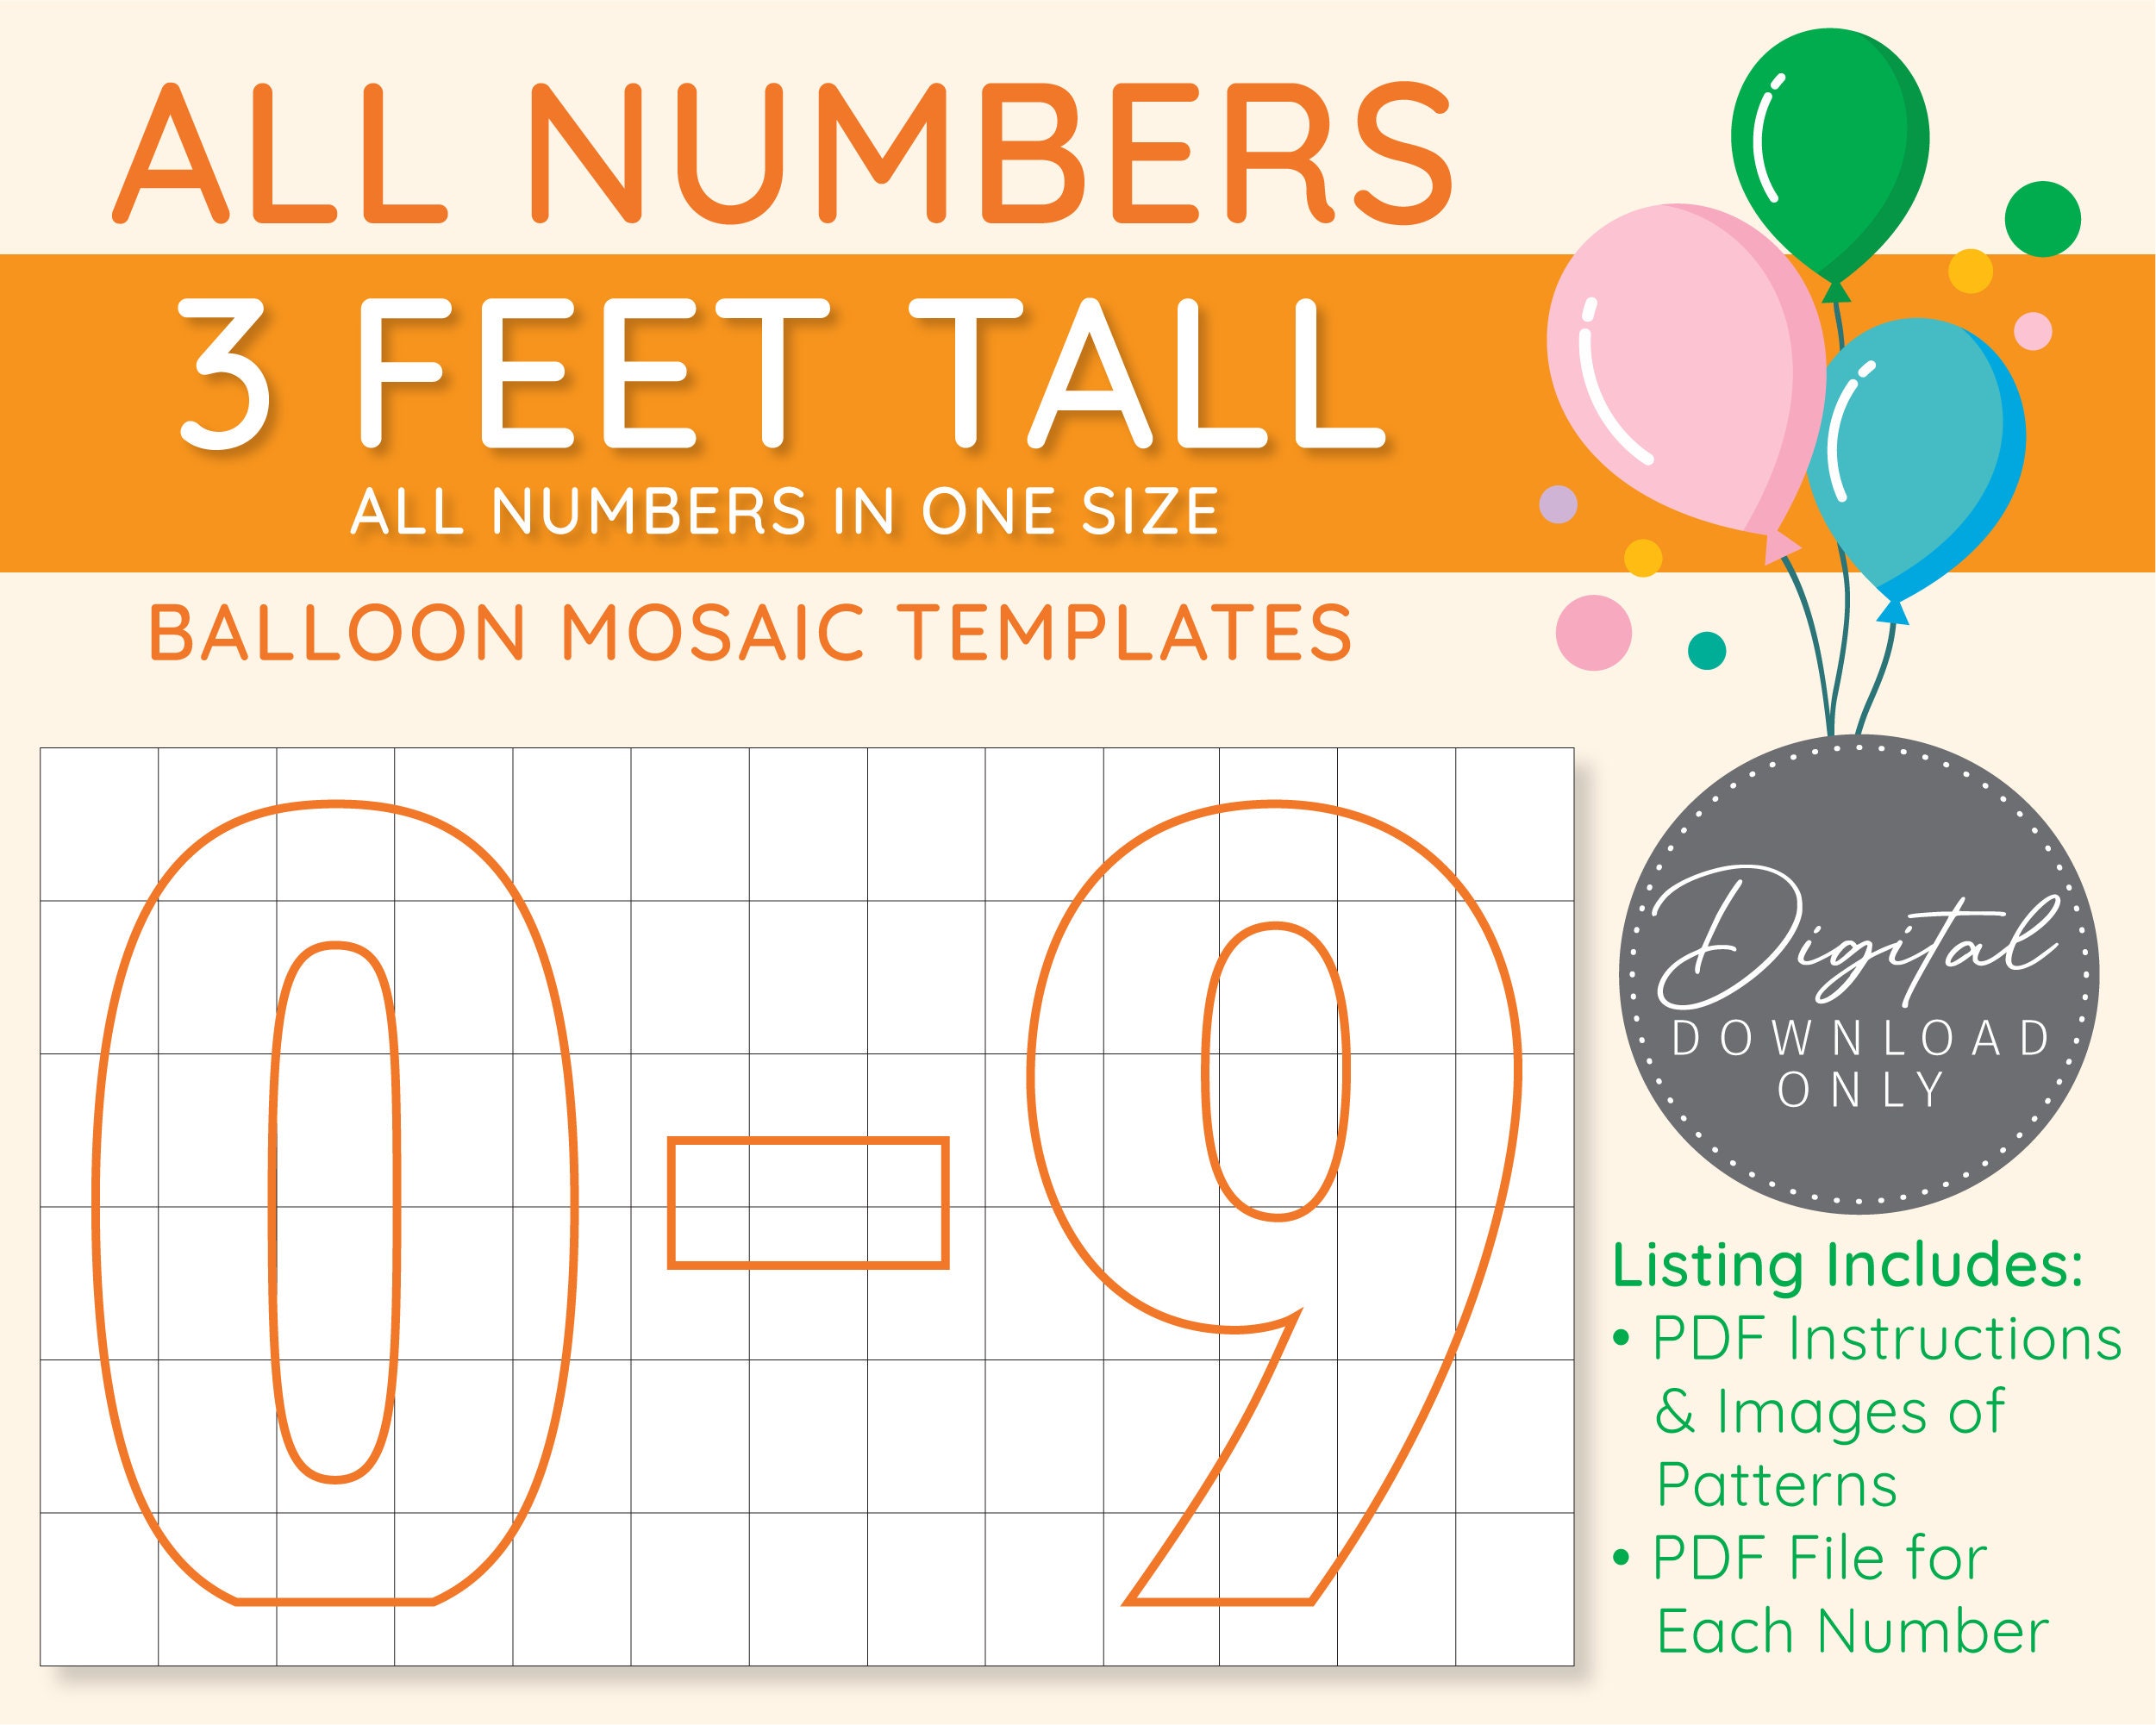 Mosaic Number Template